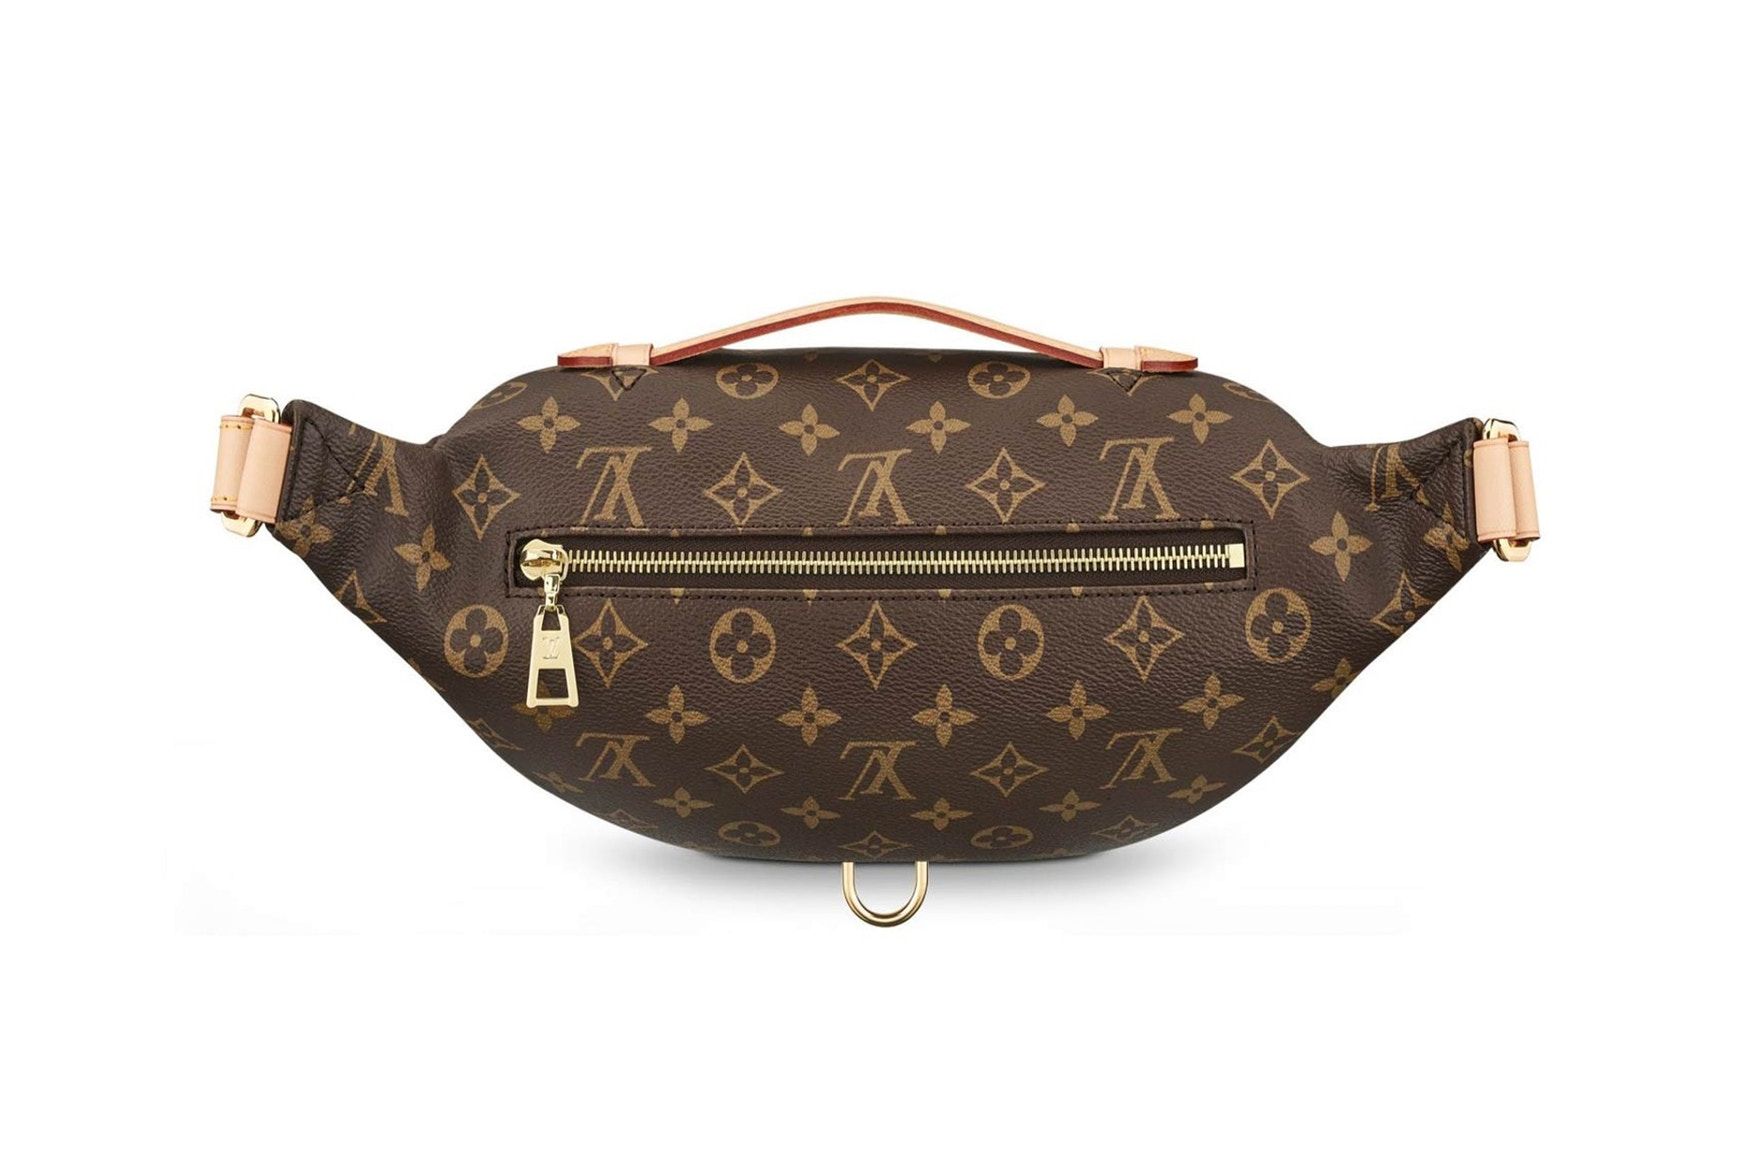 Louis Vuitton offers us the ultimate fanny pack | HIGHXTAR.